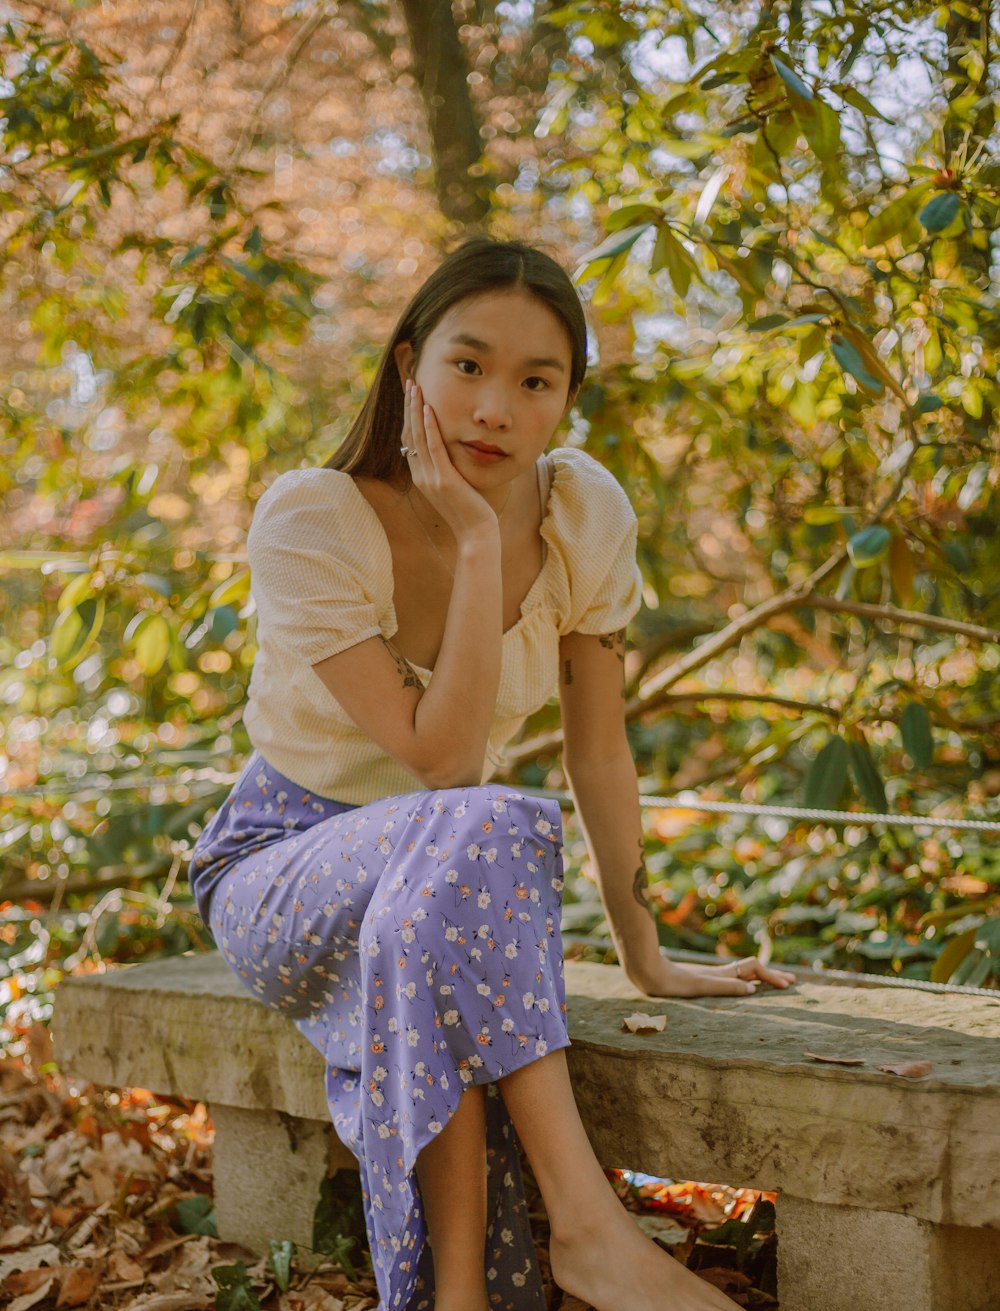 woman in yellow shirt and blue and white polka dot skirt sitting on brown wooden bench